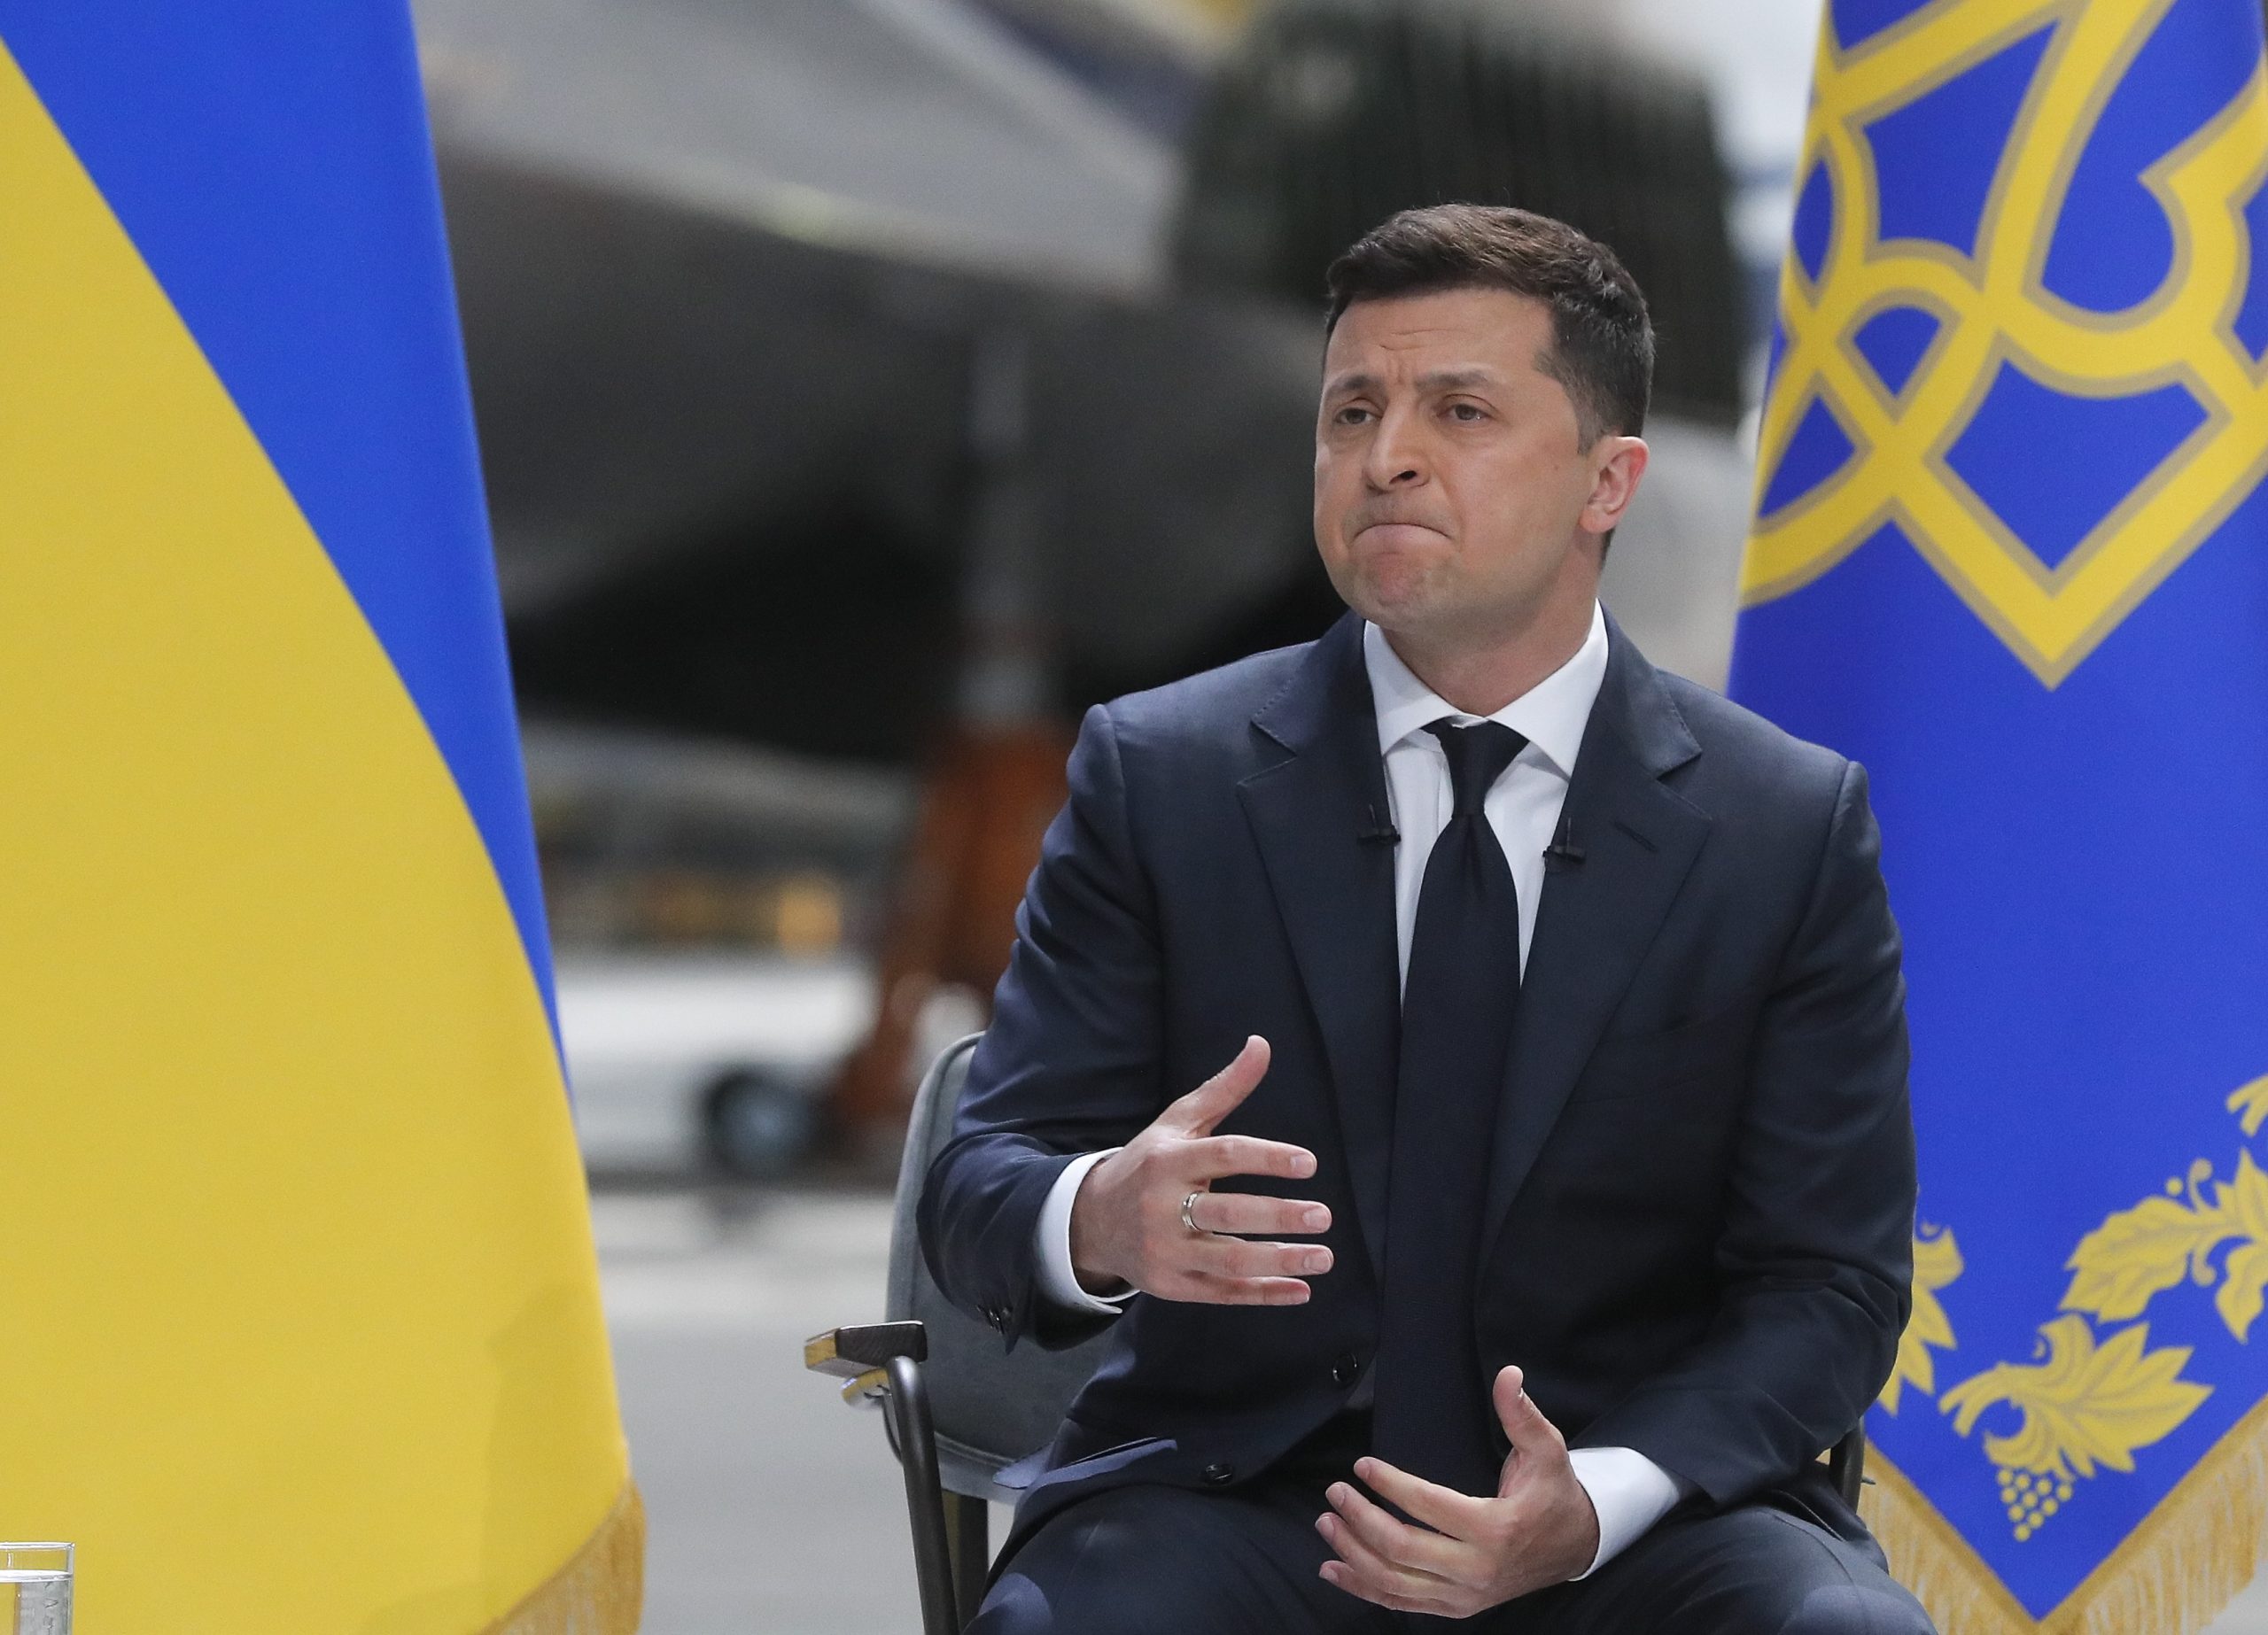 epa09214679 Ukrainian President Volodymyr Zelensky speaks during a press conference at the Antonov aircraft plant in Kiev, Ukraine, 20 May 2021. Zelensky answered journalists' questions during a press conference about his two years in office.  EPA/SERGEY DOLZHENKO